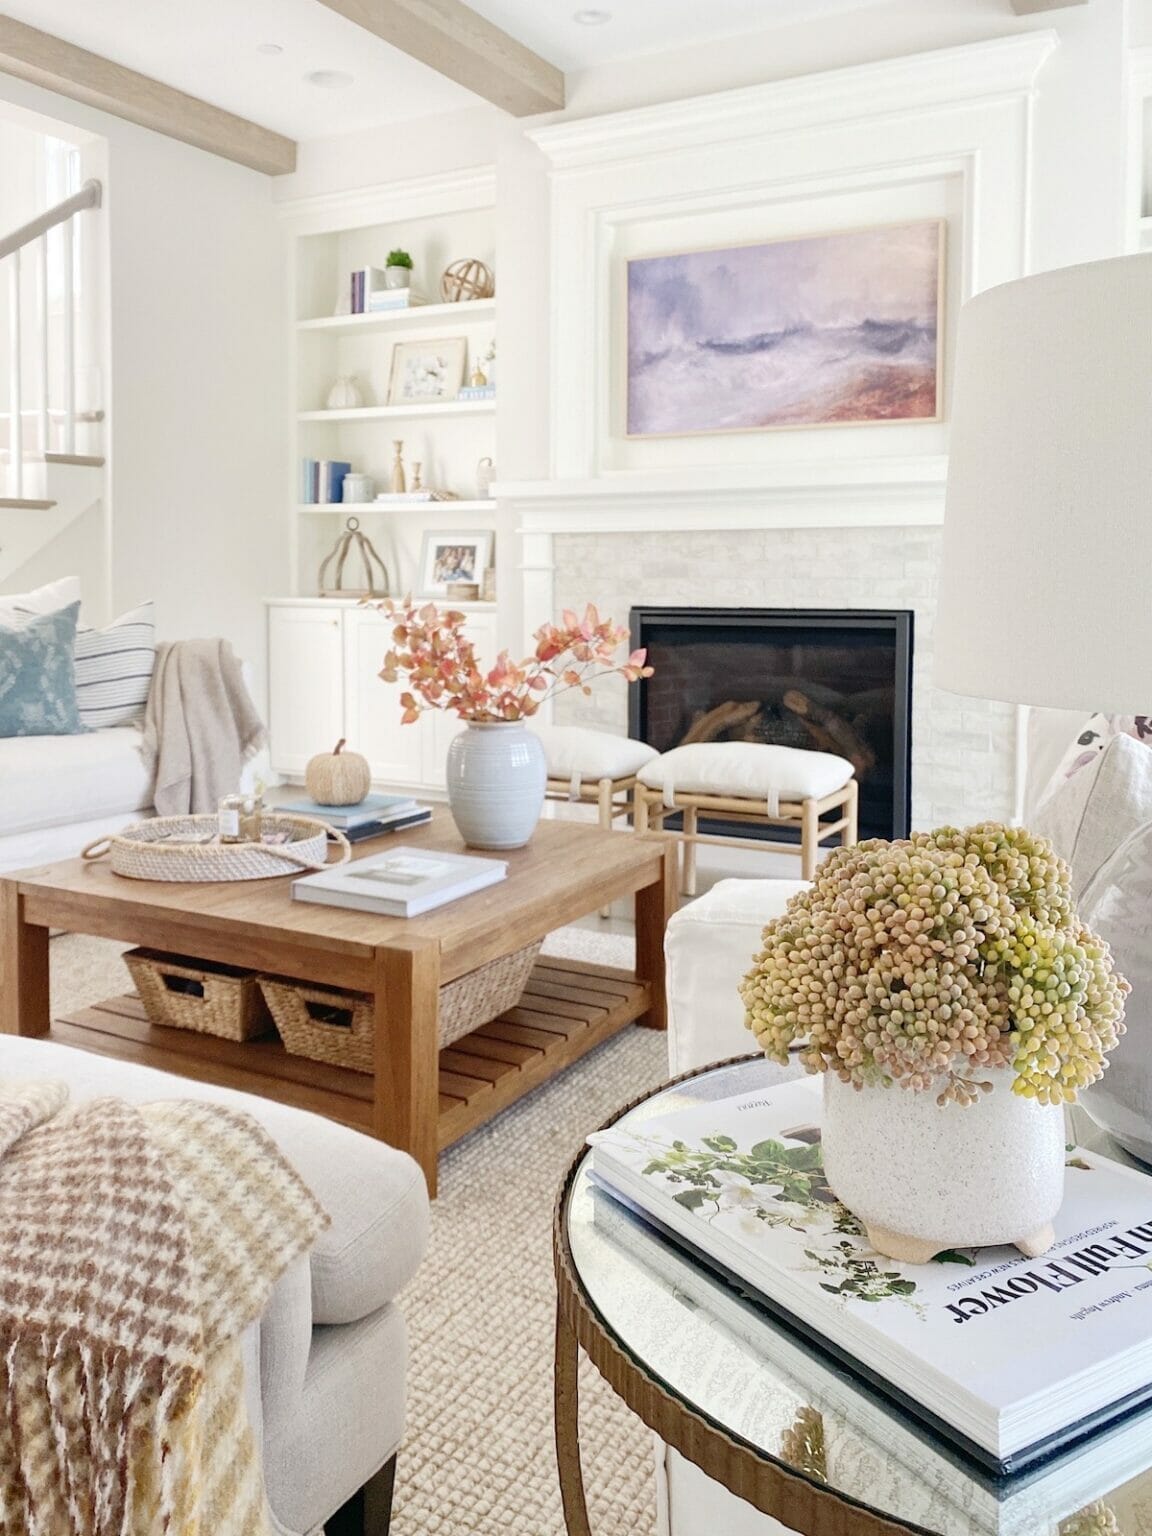 Fall 2020 Home Tour: Getting Cozy with Autumn Accents